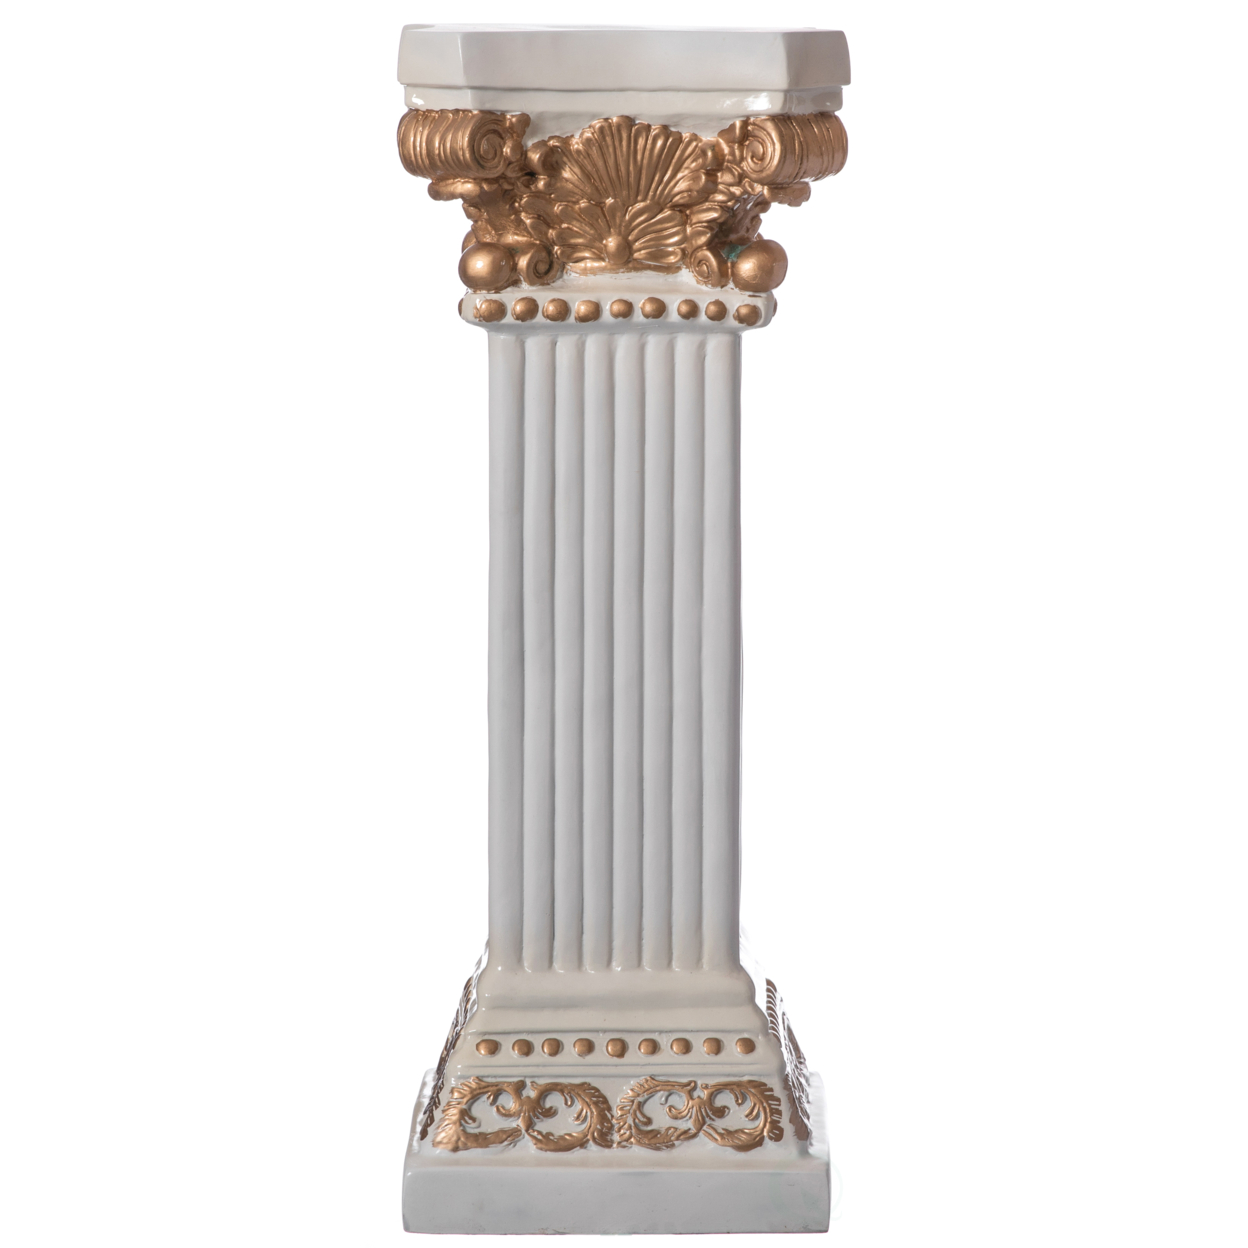 Decorative Modern Fiberglass White And Gold Plinth Roman Style Column Ionic Pedestal Vase Stand For Wedding, Living Room, Or Dining Room - 2